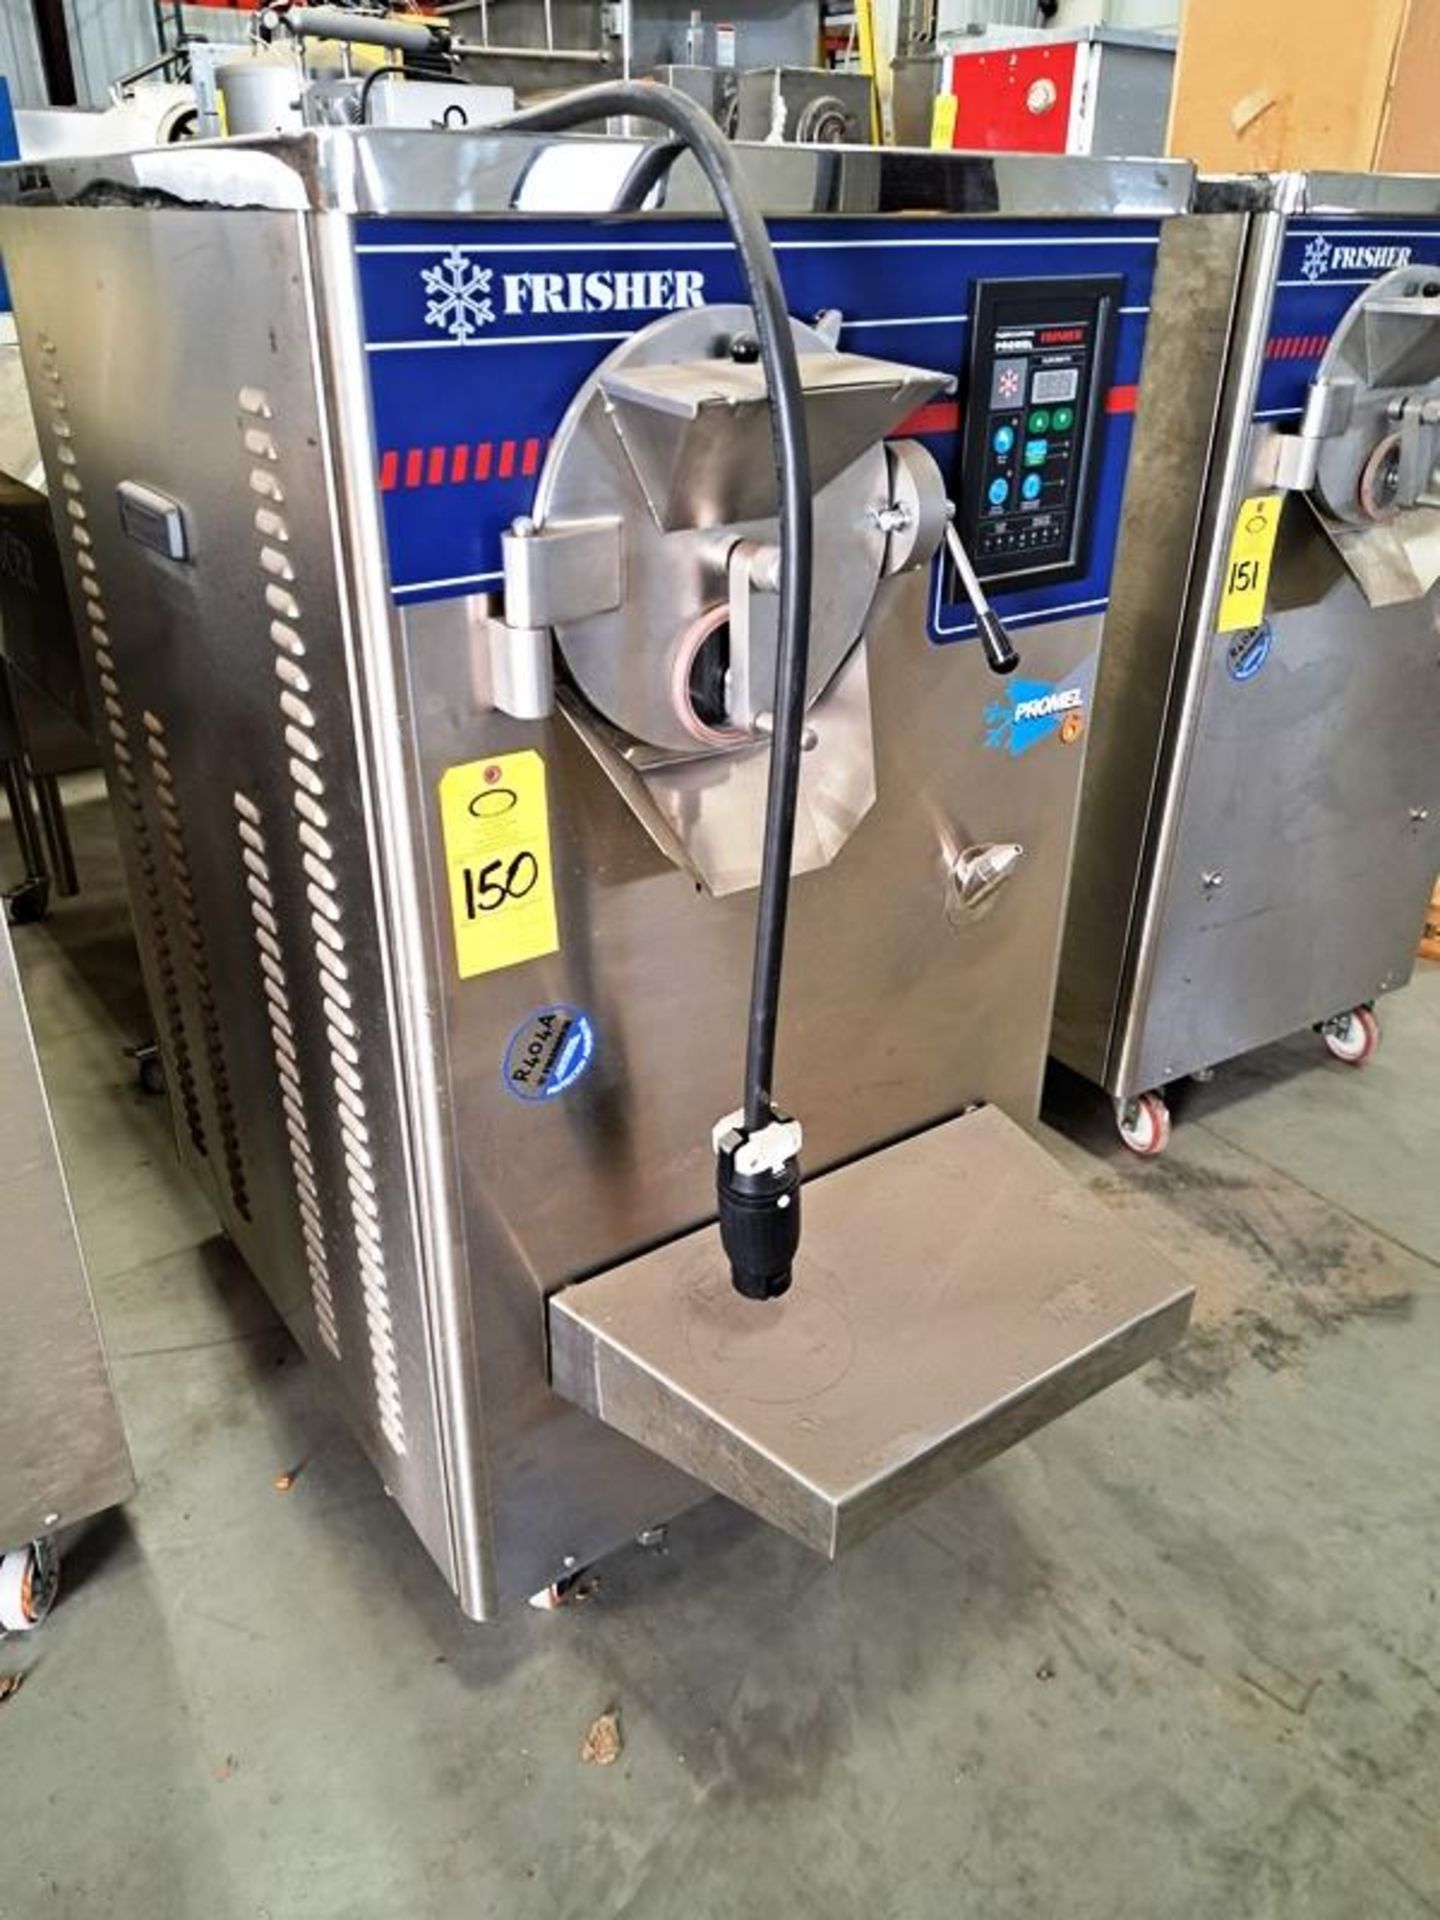 Frisher Promel 6 Ice Cream Dispenser, Ser. #4724, 5 h.p., 220 volts, 3 phase (Required Loading